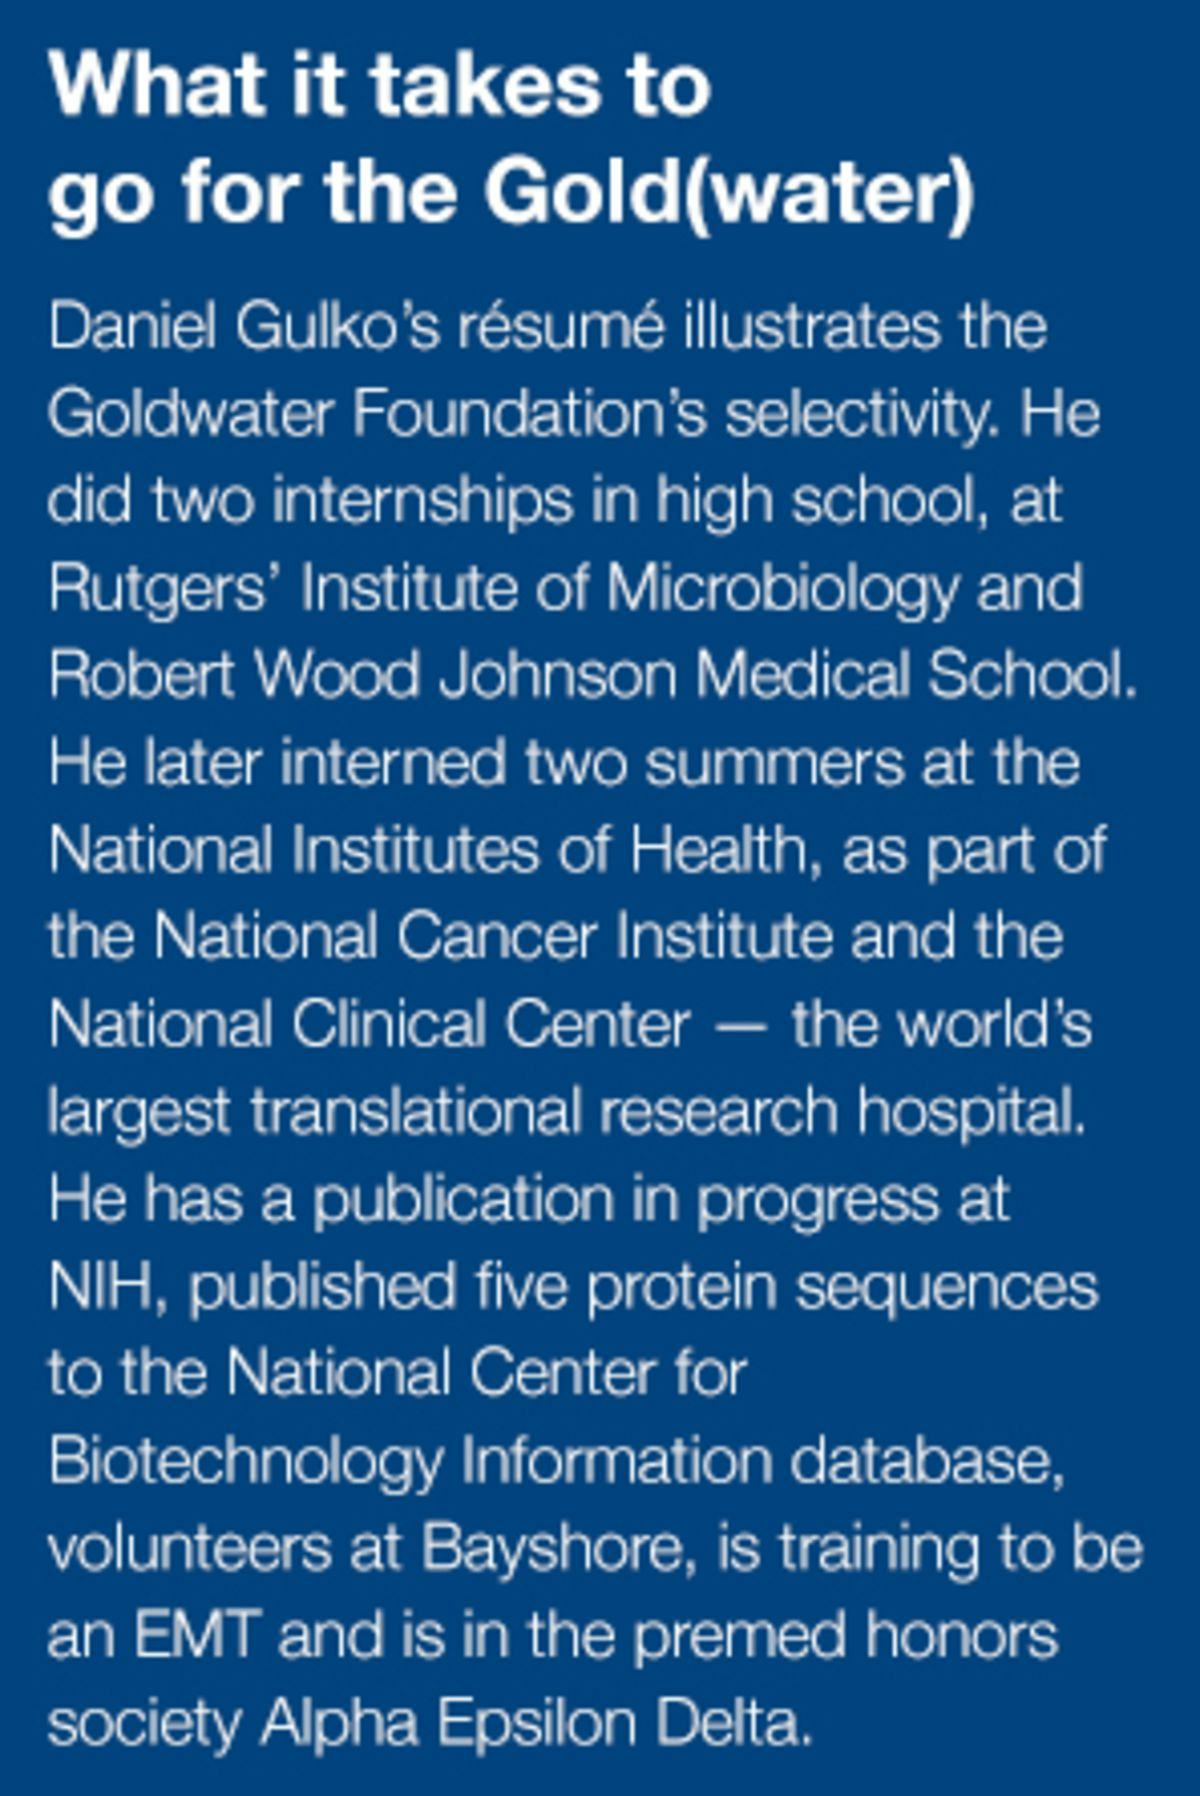 Text box describing how Daniel Gulko did two internships in high school, two more afterward, is publishing a paper with NIH and his other premed activities.